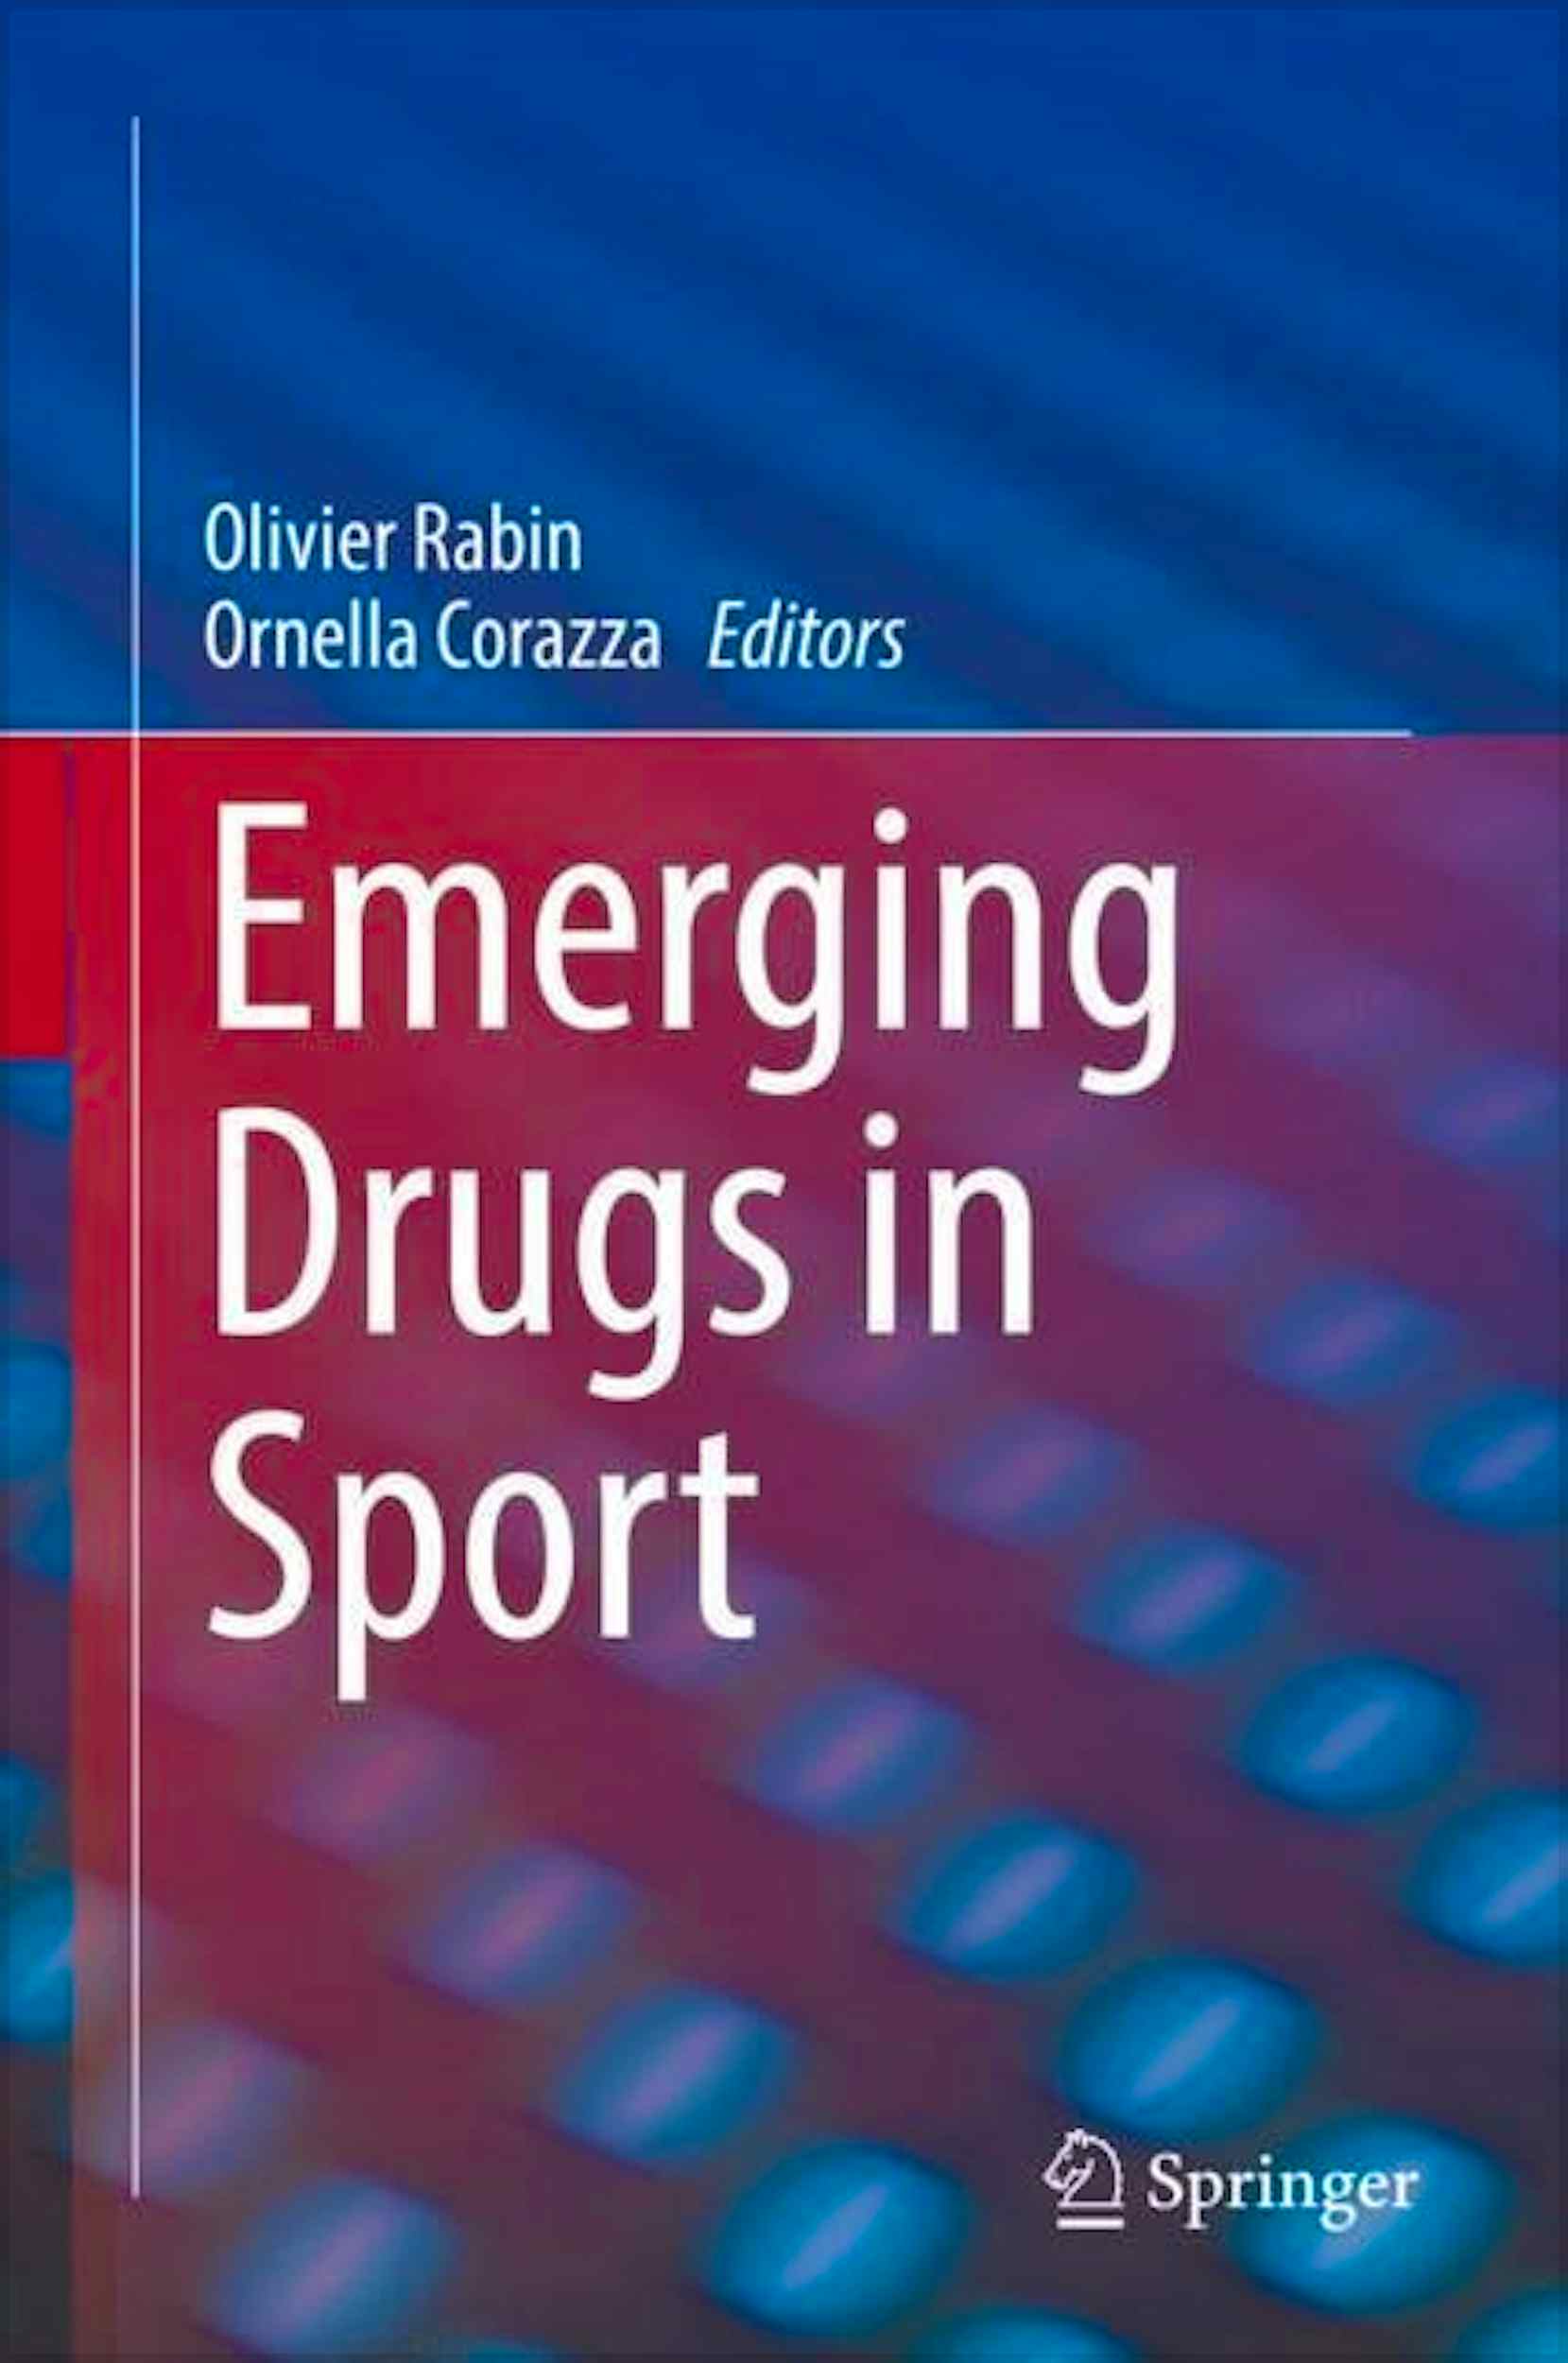 research paper on drugs in sports